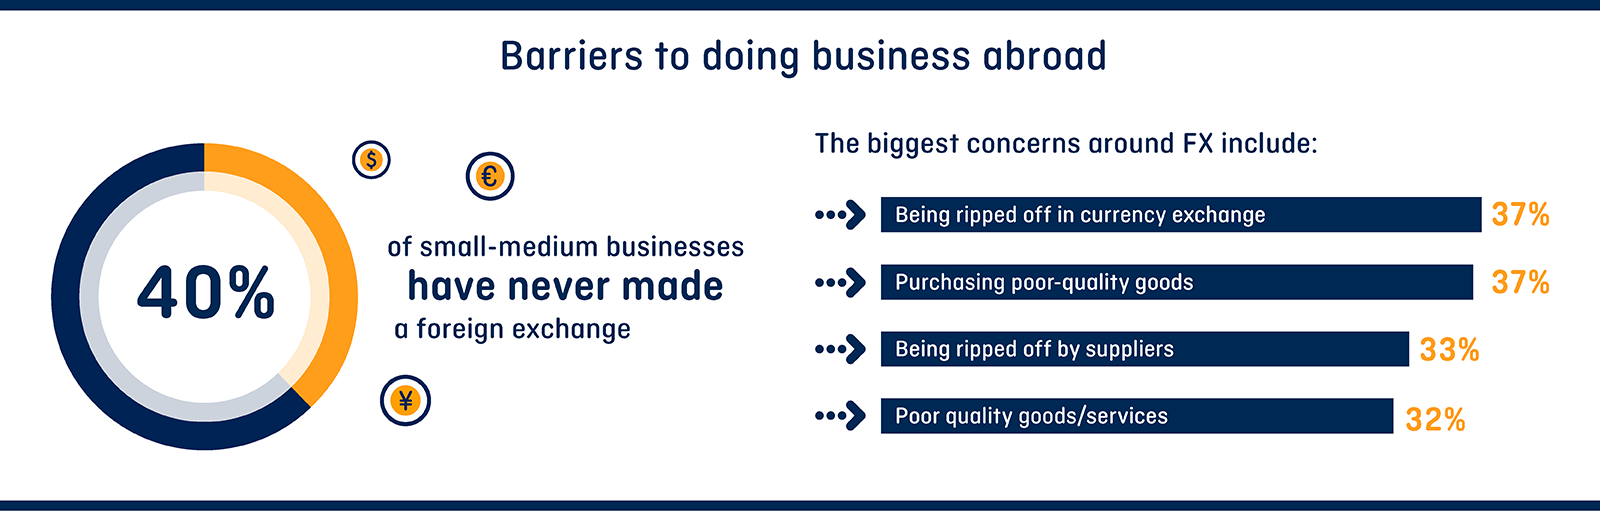 Barriers to doing business abroad